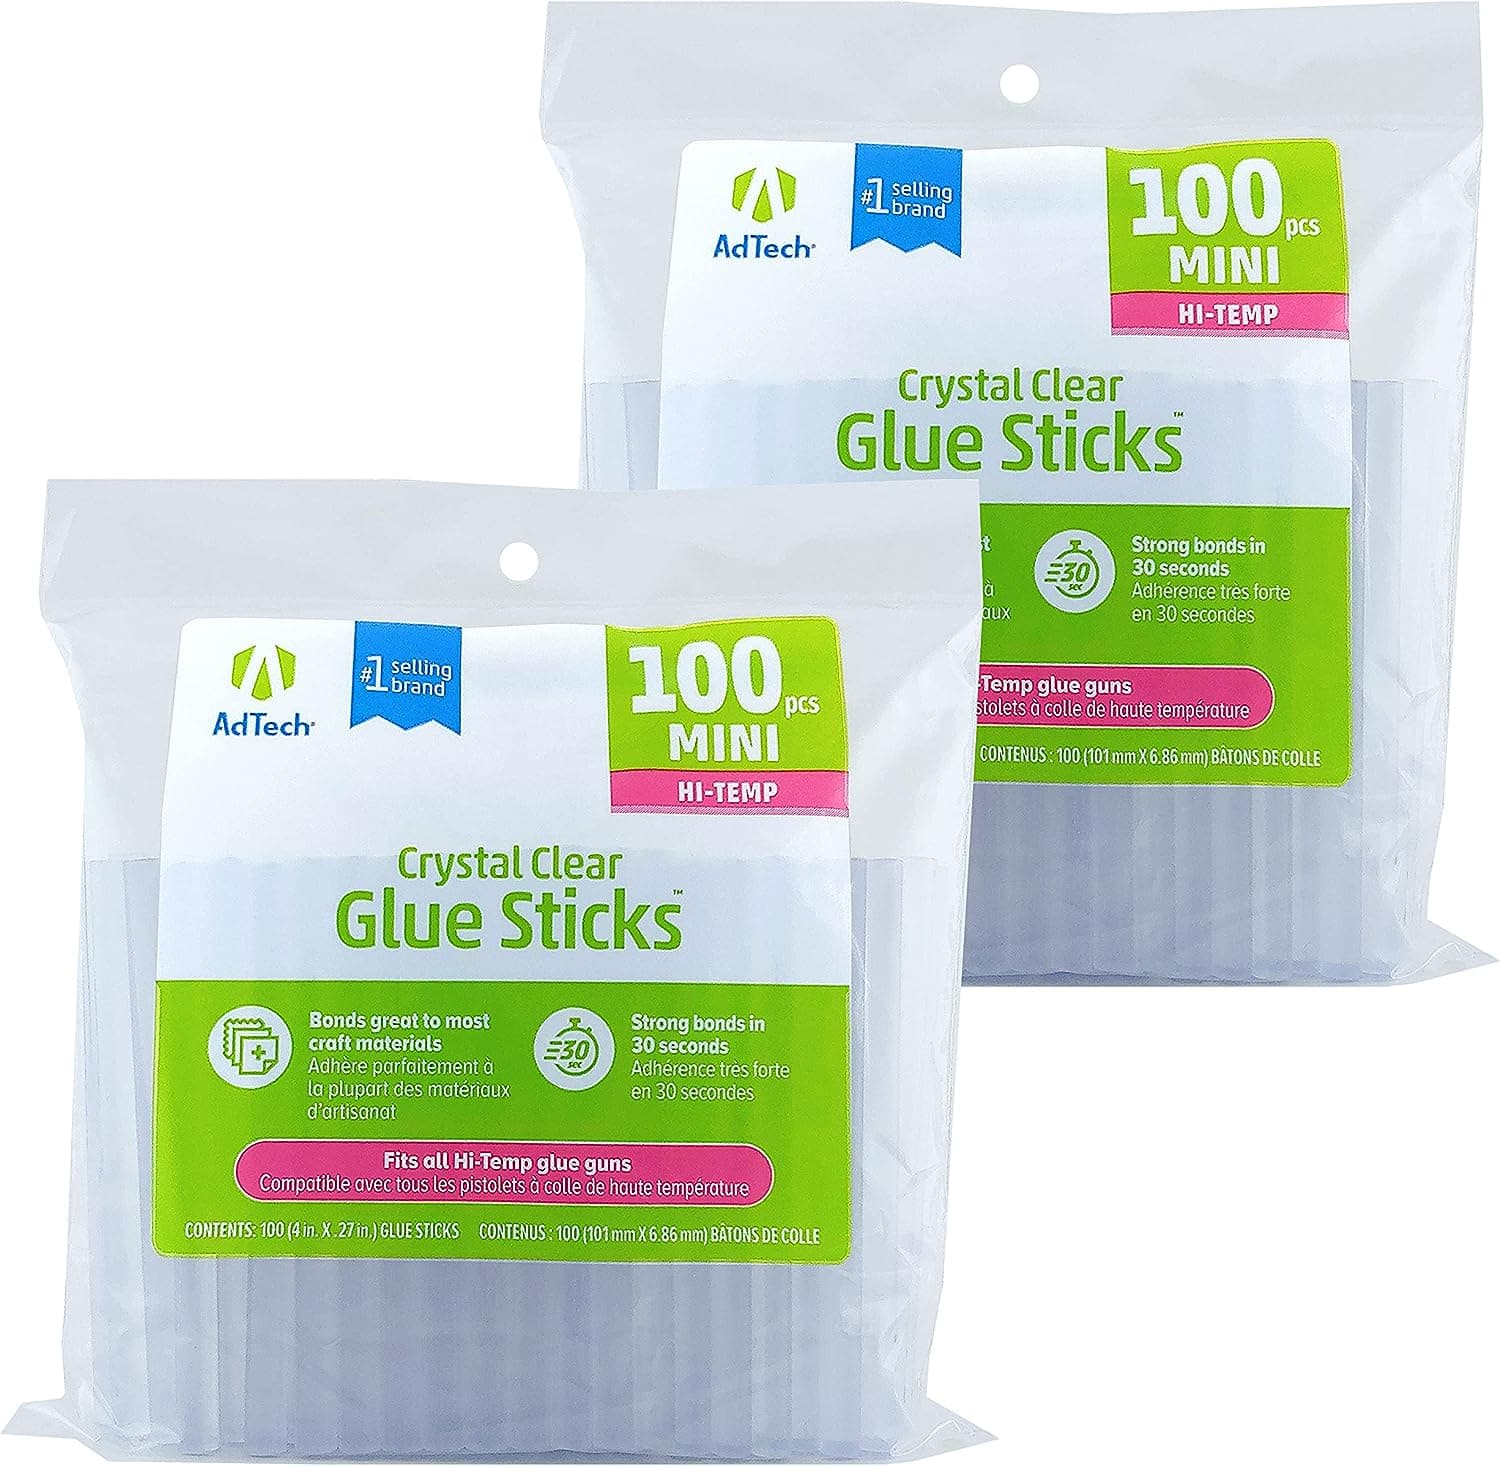 EnPoint Hot Glue Sticks Full Size, 12 Pack 8 Long x 0.43 Dia Red